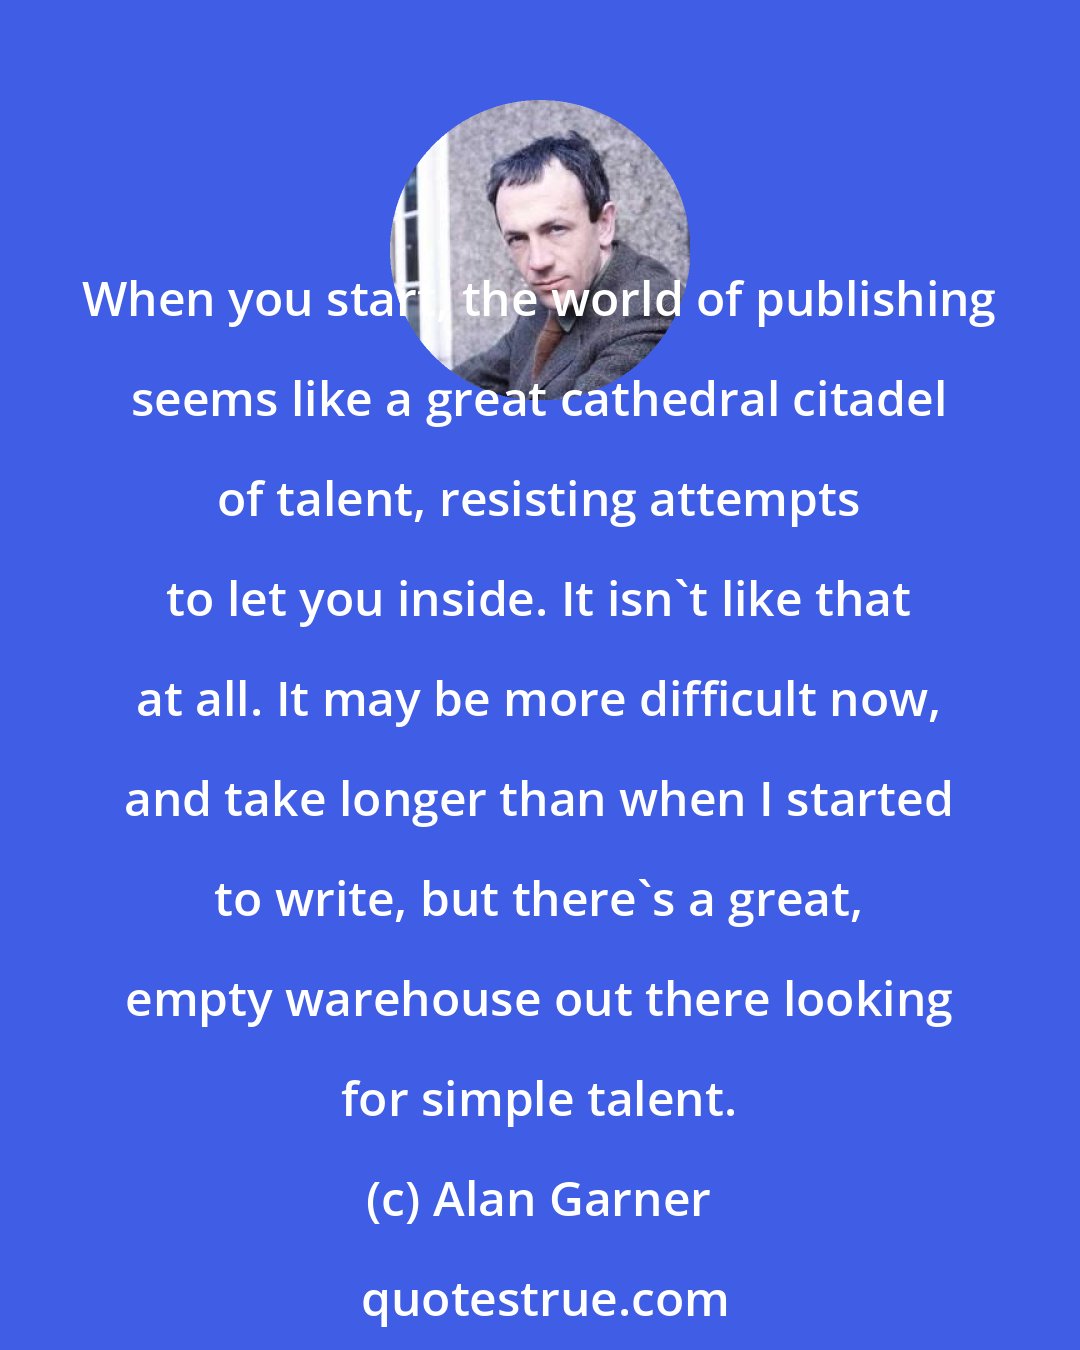 Alan Garner: When you start, the world of publishing seems like a great cathedral citadel of talent, resisting attempts to let you inside. It isn't like that at all. It may be more difficult now, and take longer than when I started to write, but there's a great, empty warehouse out there looking for simple talent.